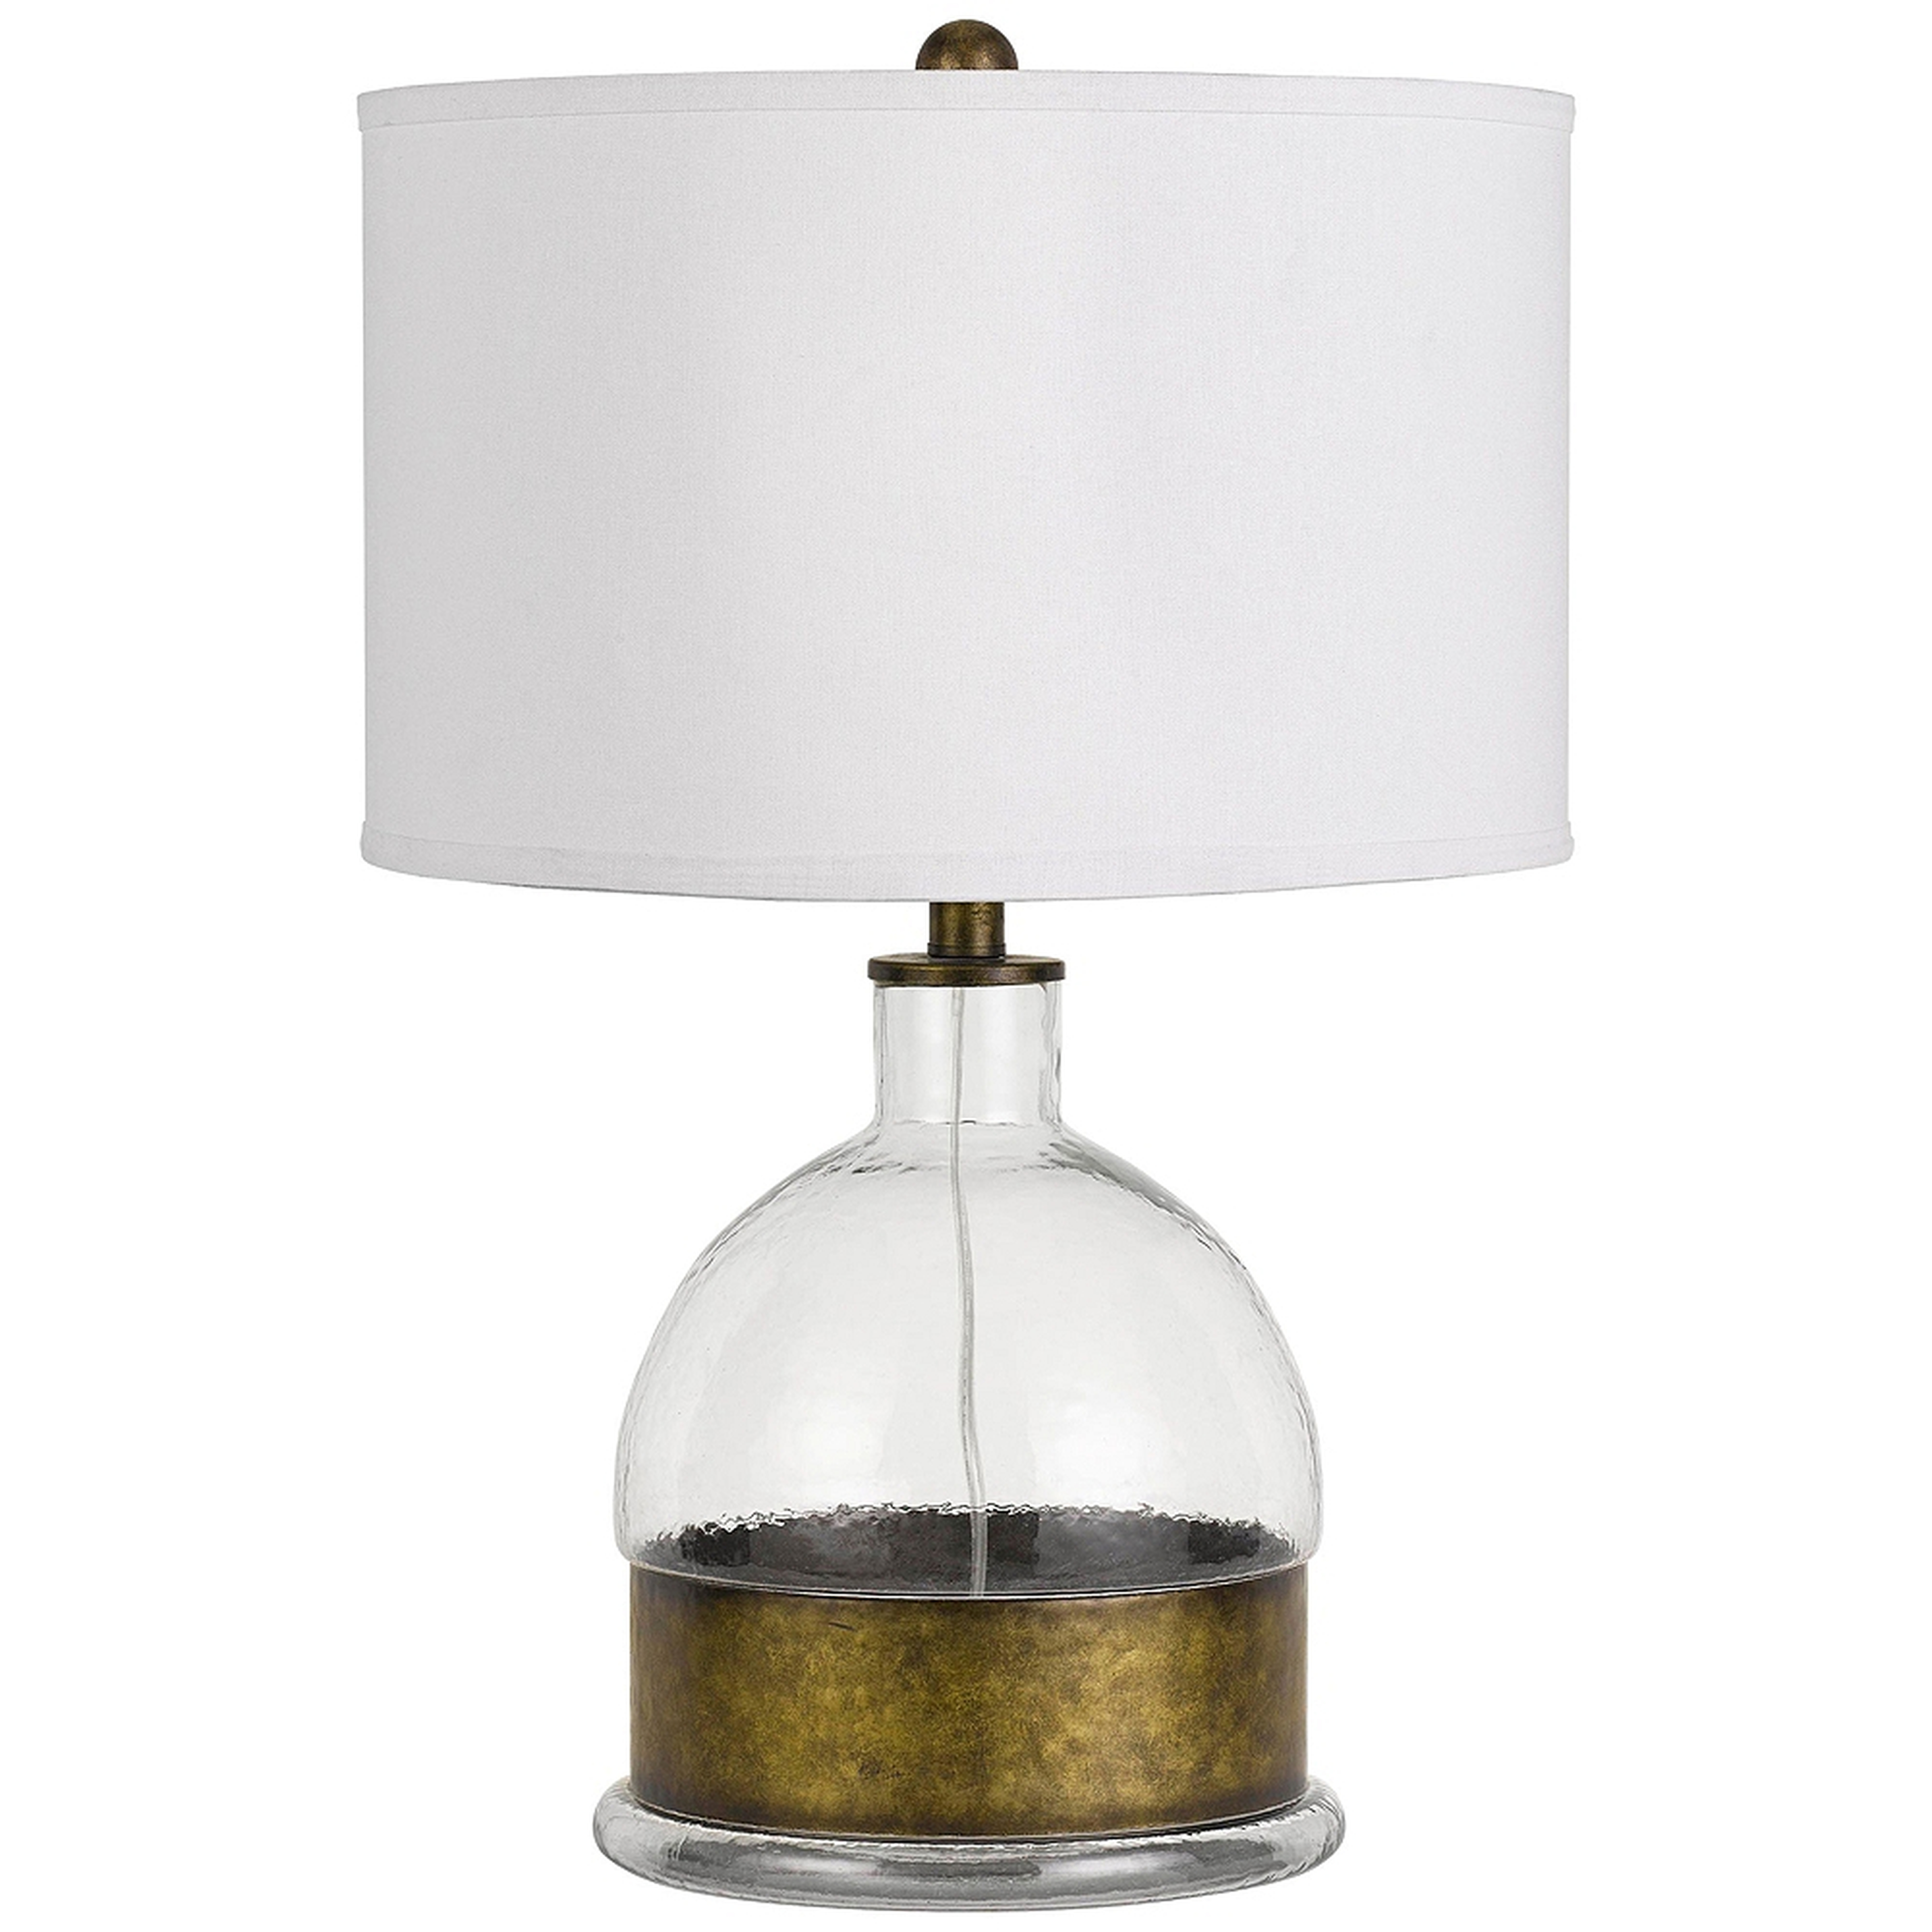 Rapallo Clear Glass Table Lamp with Antique Brass Accents - Style # 63K22 - Lamps Plus